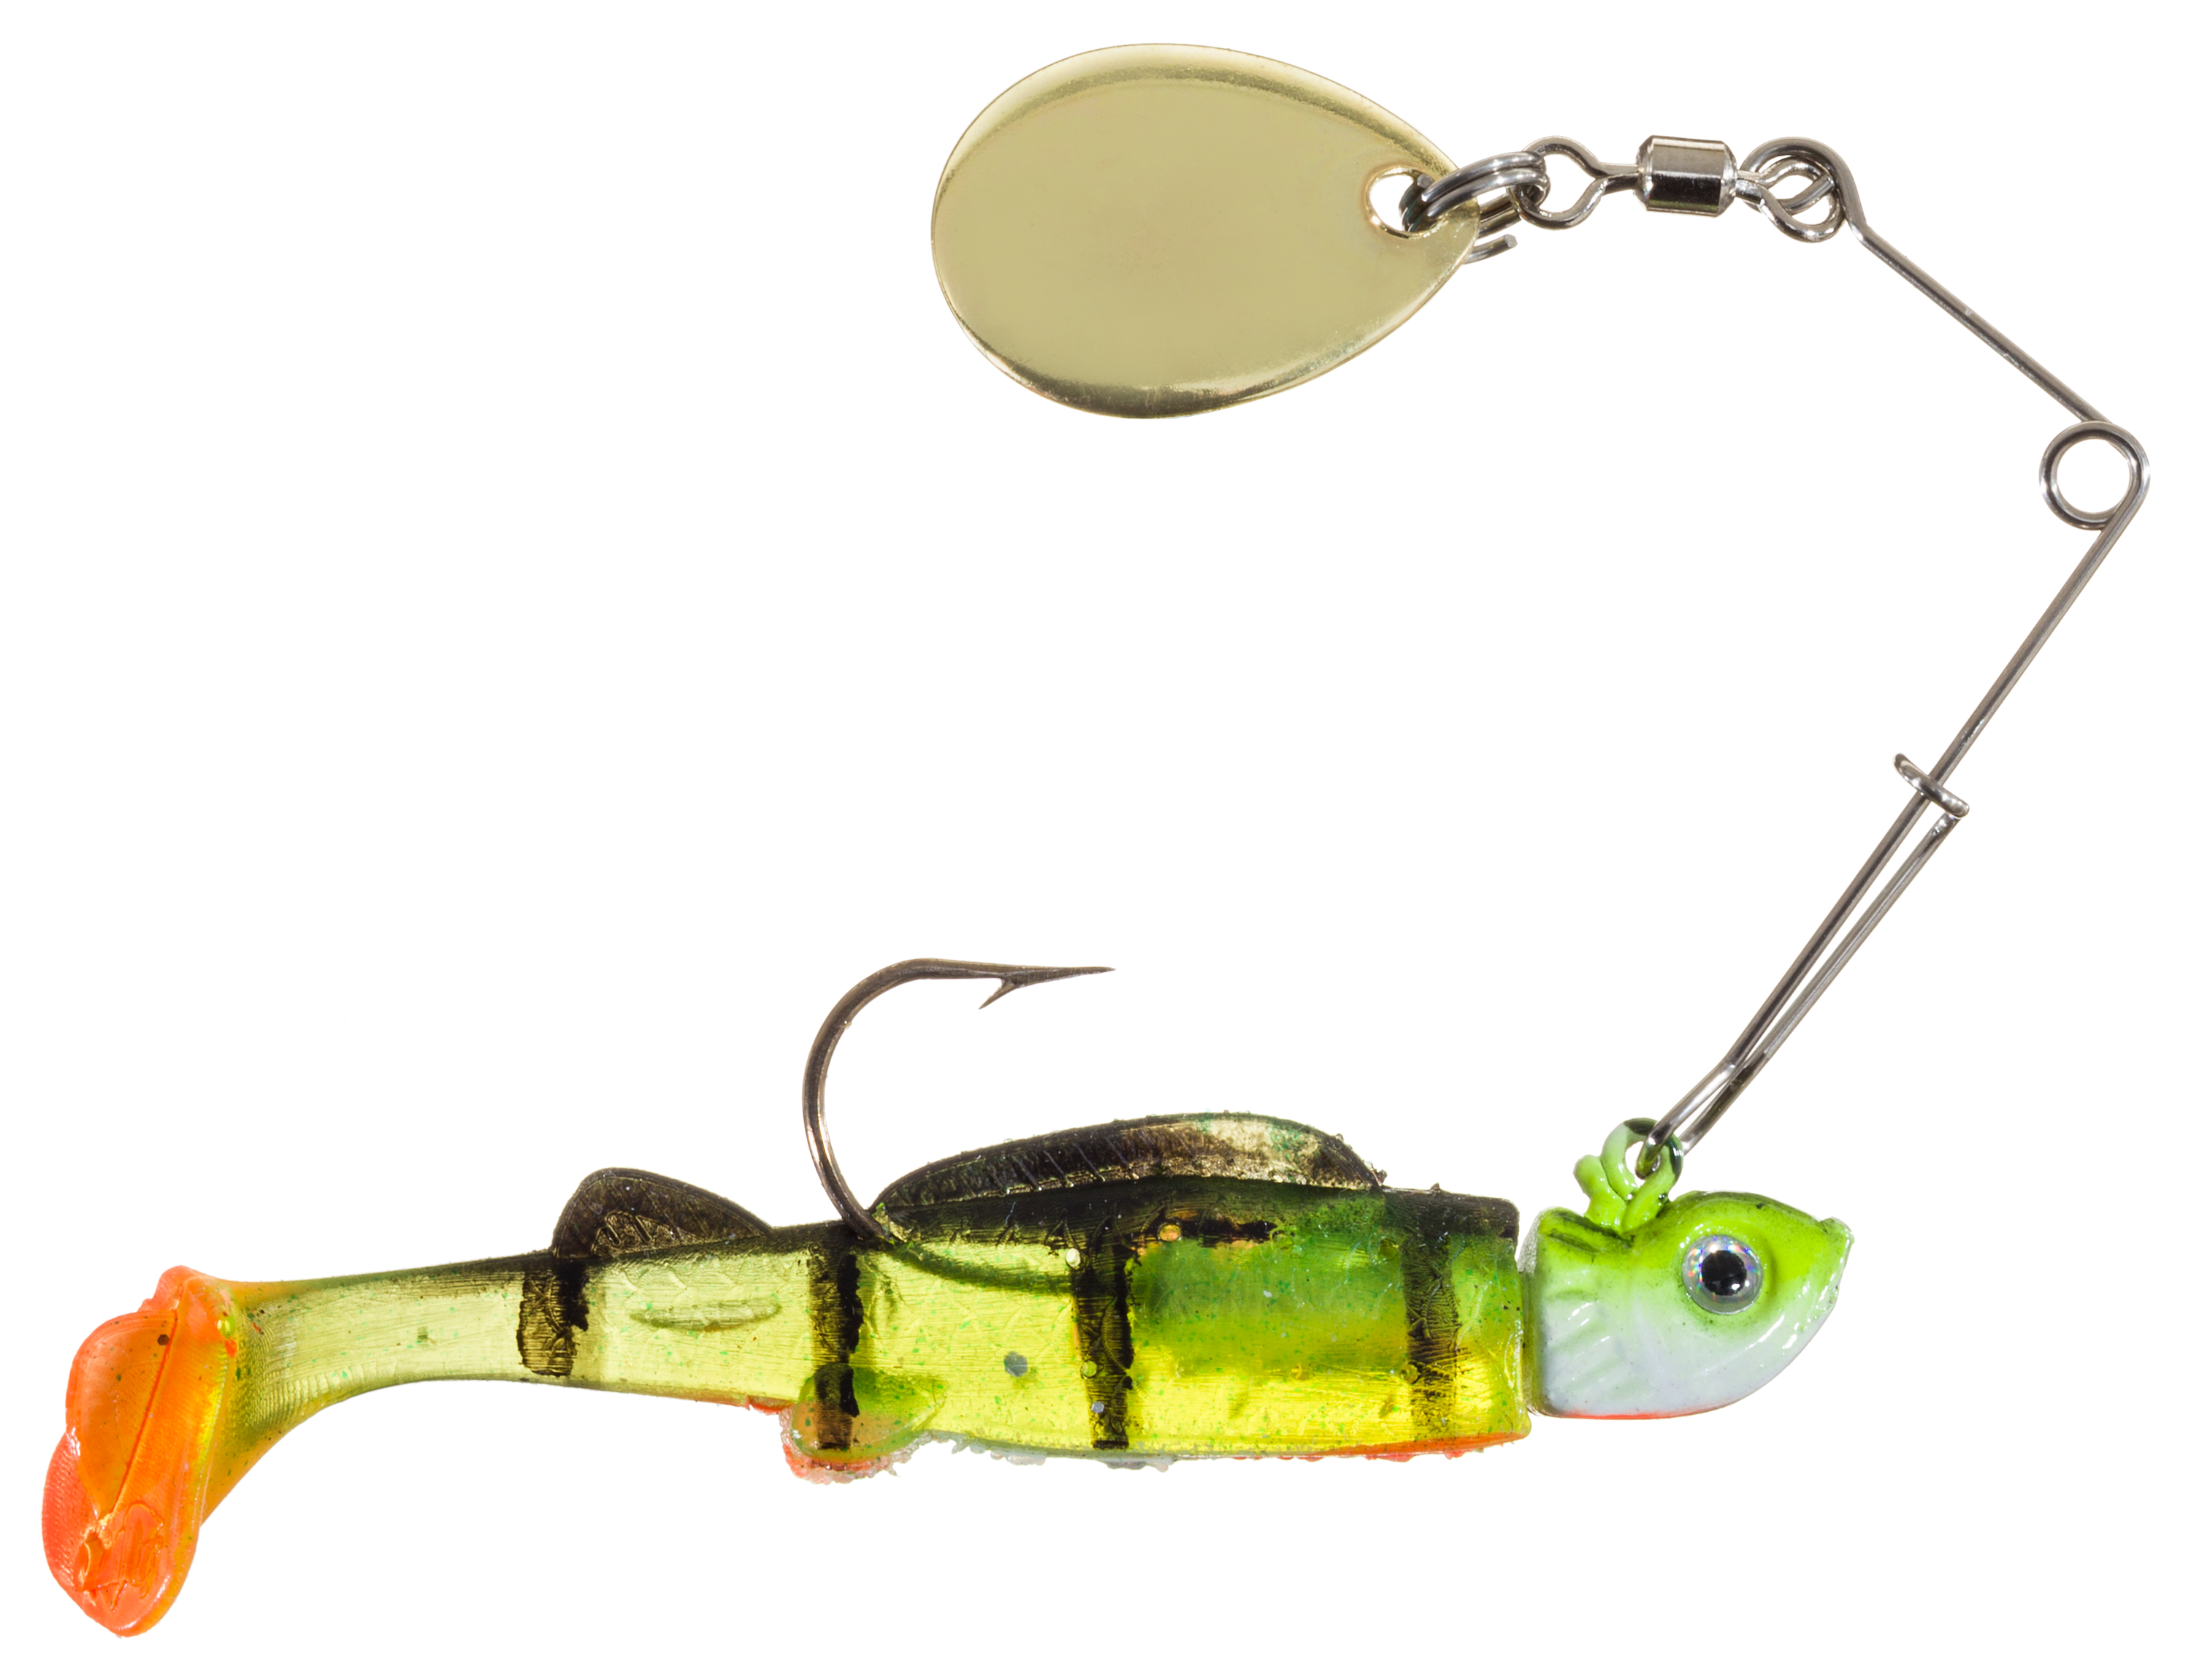 POW Casting The Big River Fast Water Jig Head 3/4oz / Silver Shiner